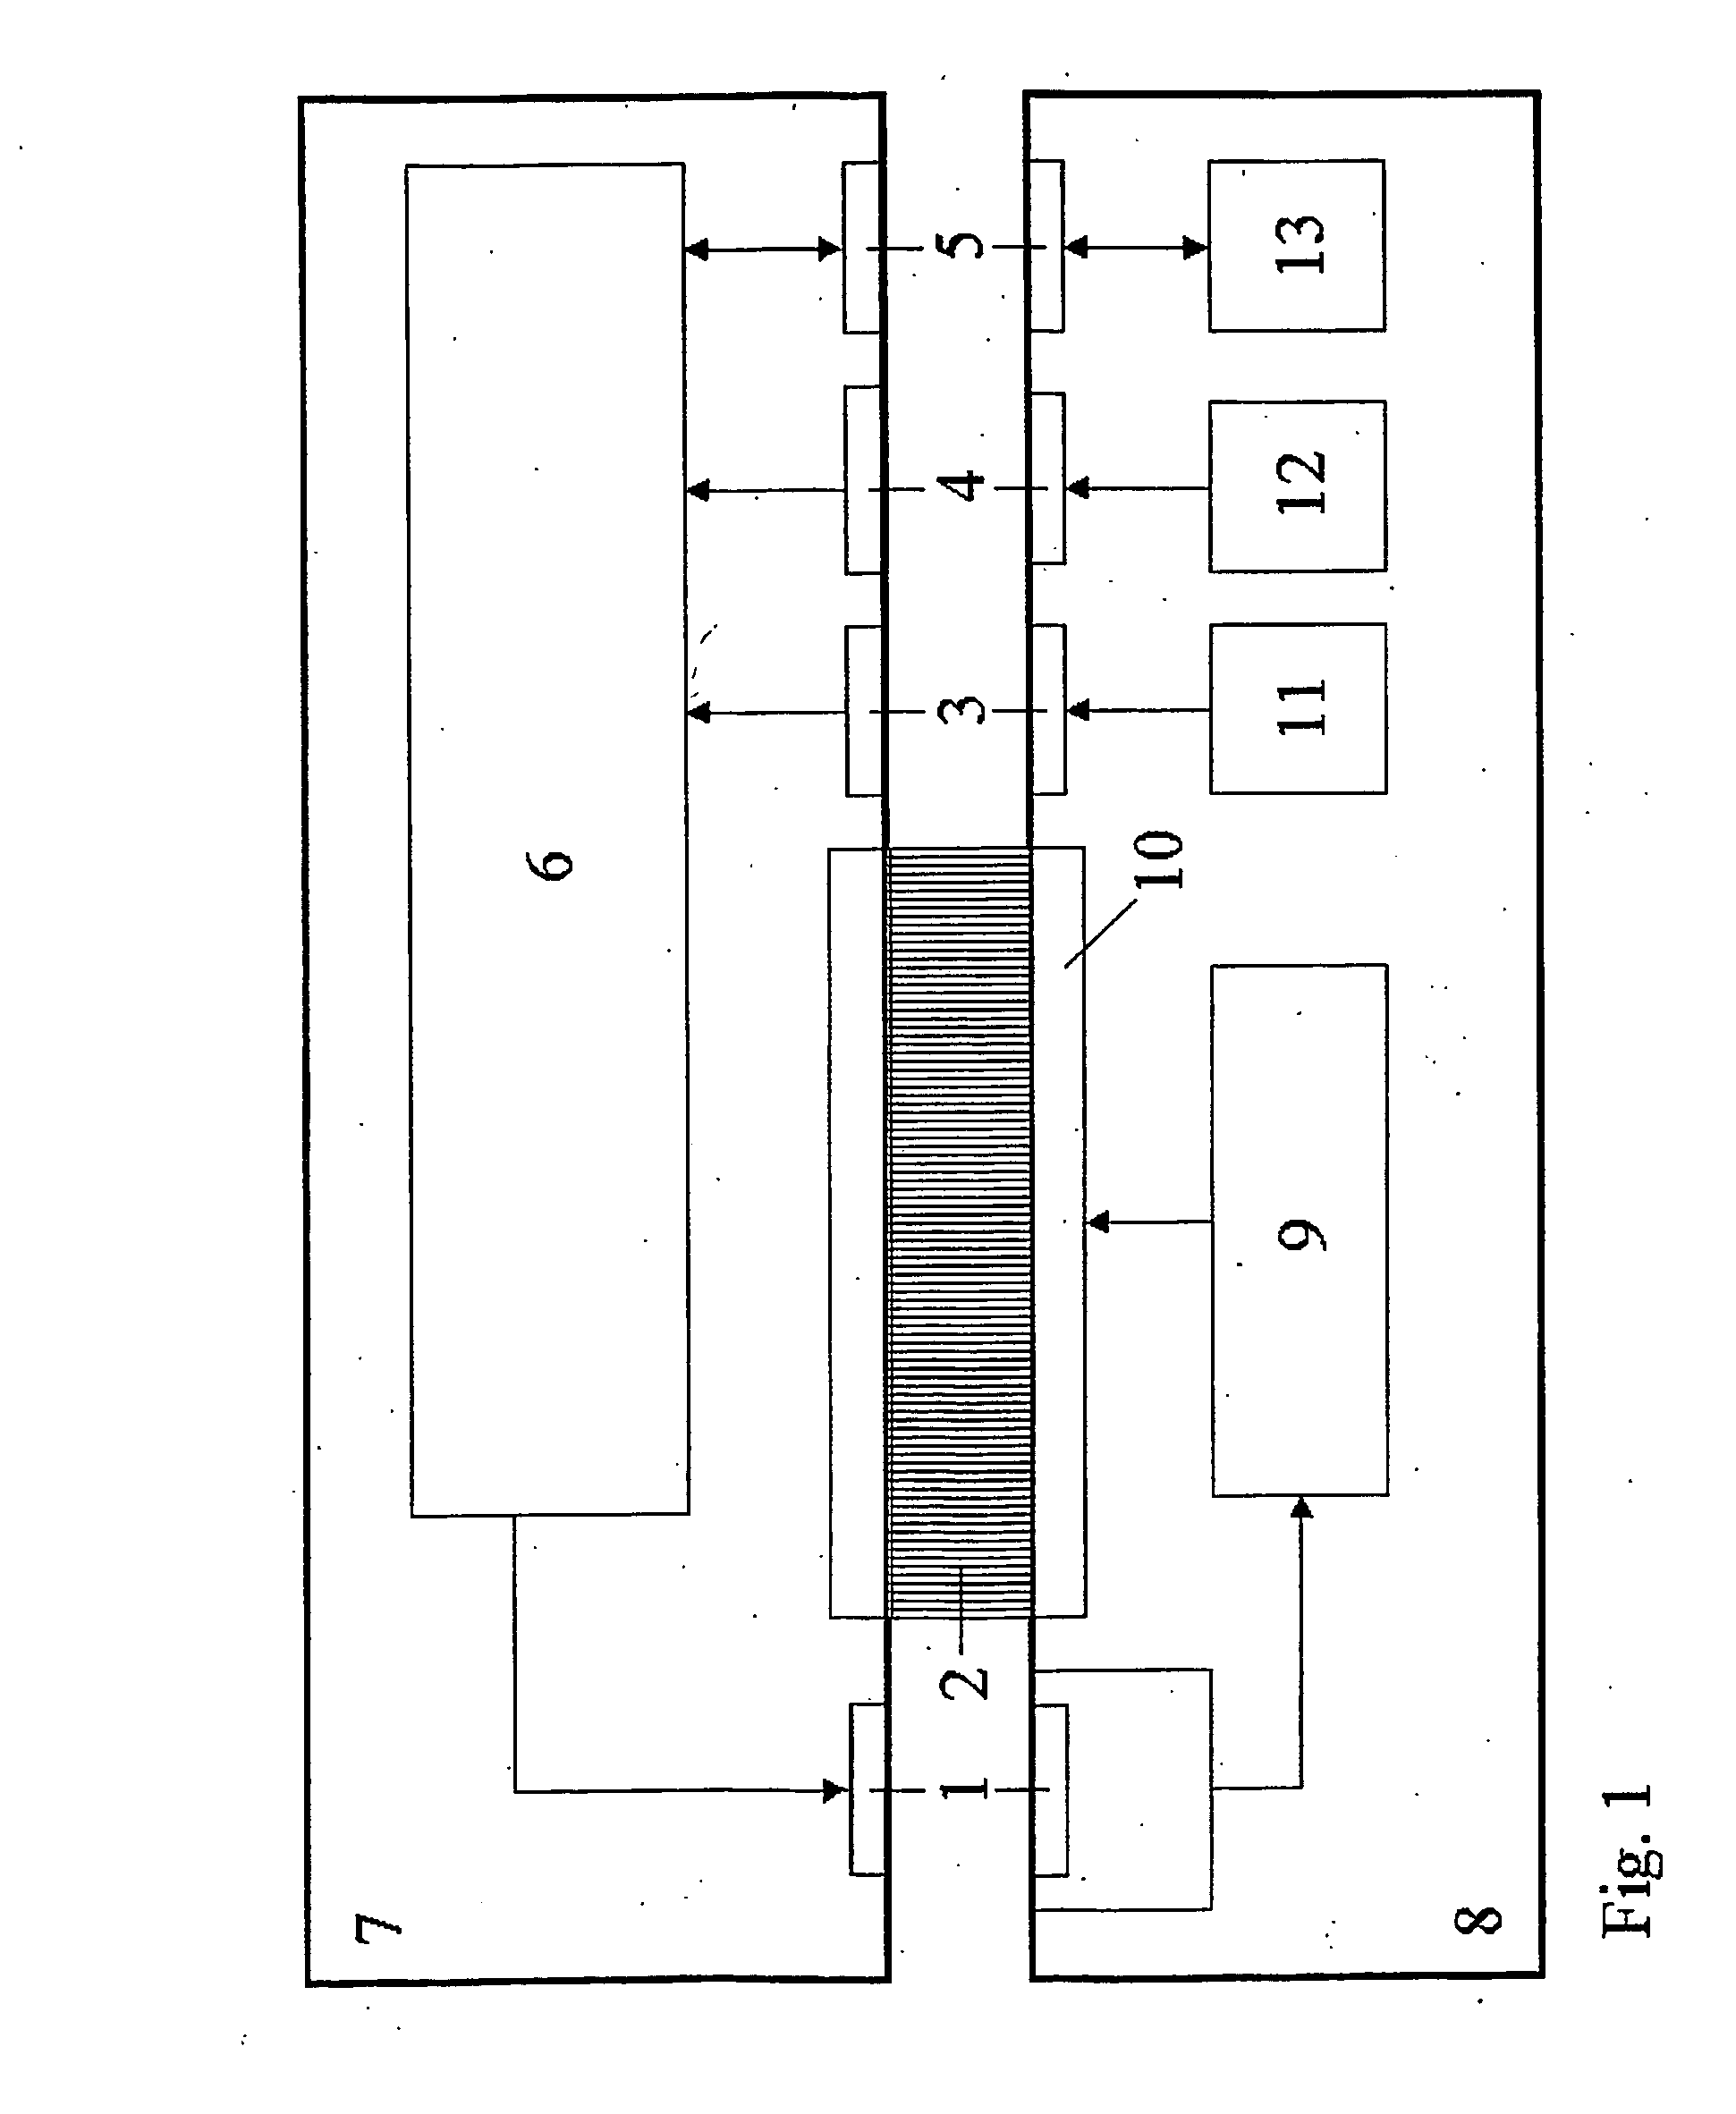 Linear motor with progressive motion control